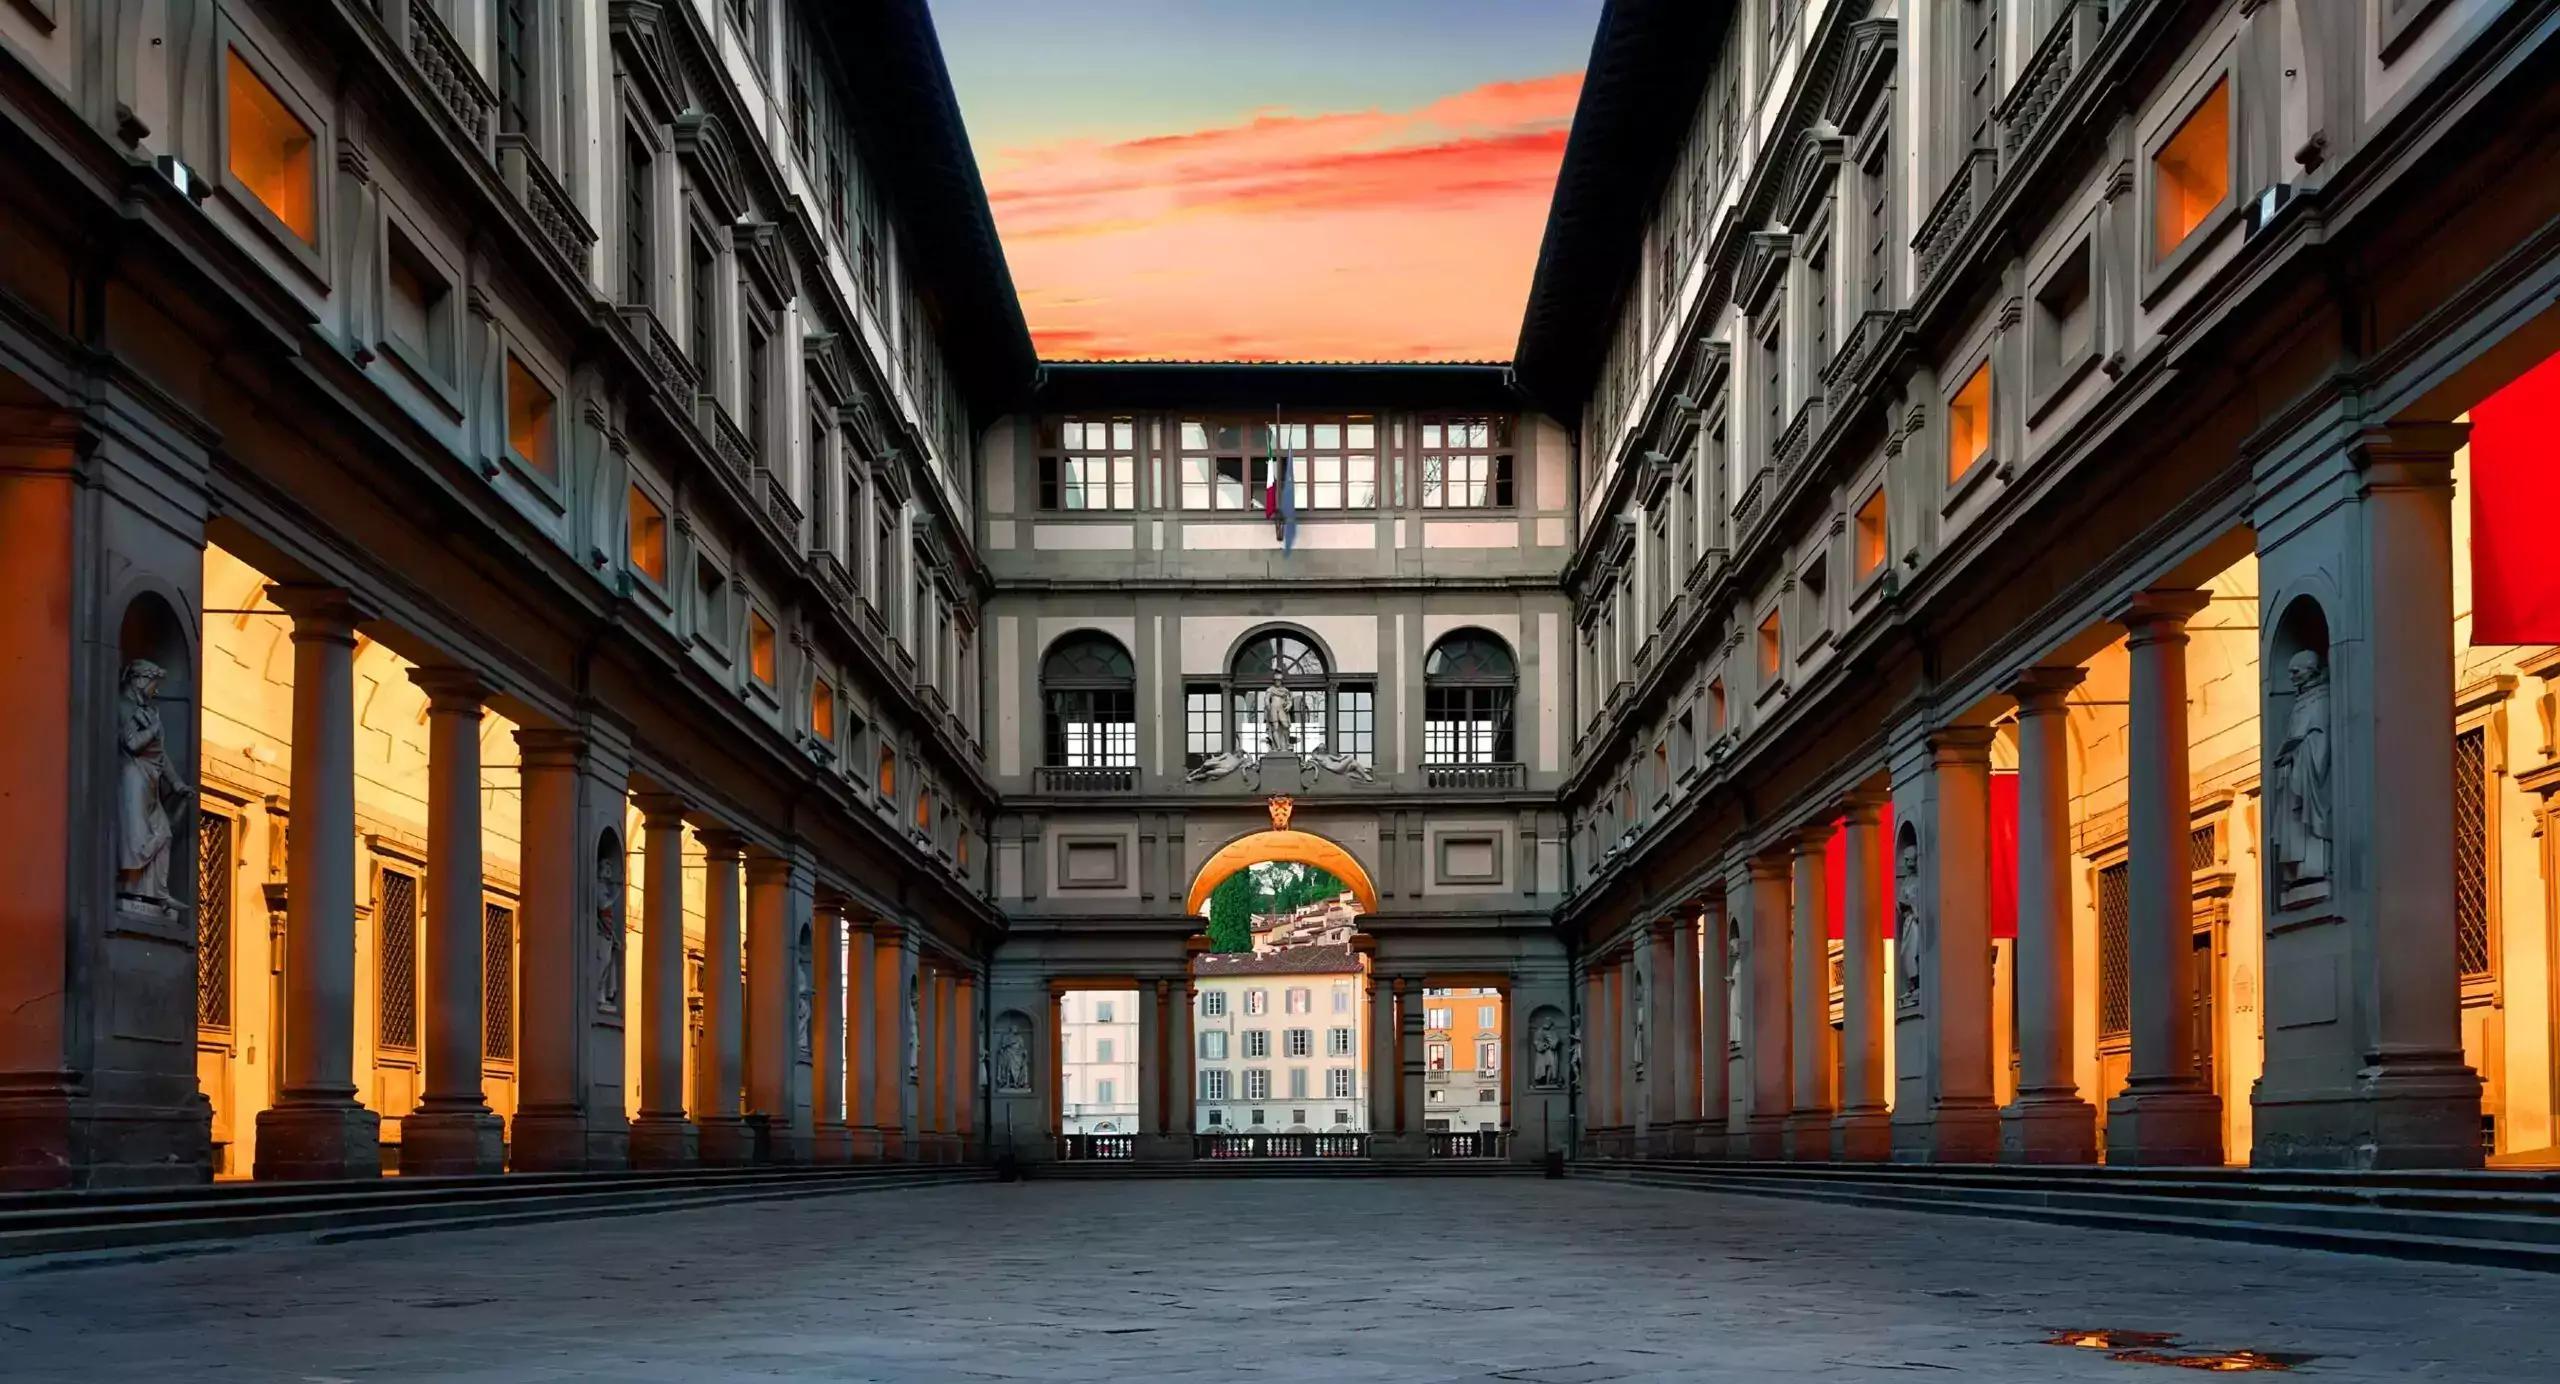 The Uffizi Gallery in Florence, Italy